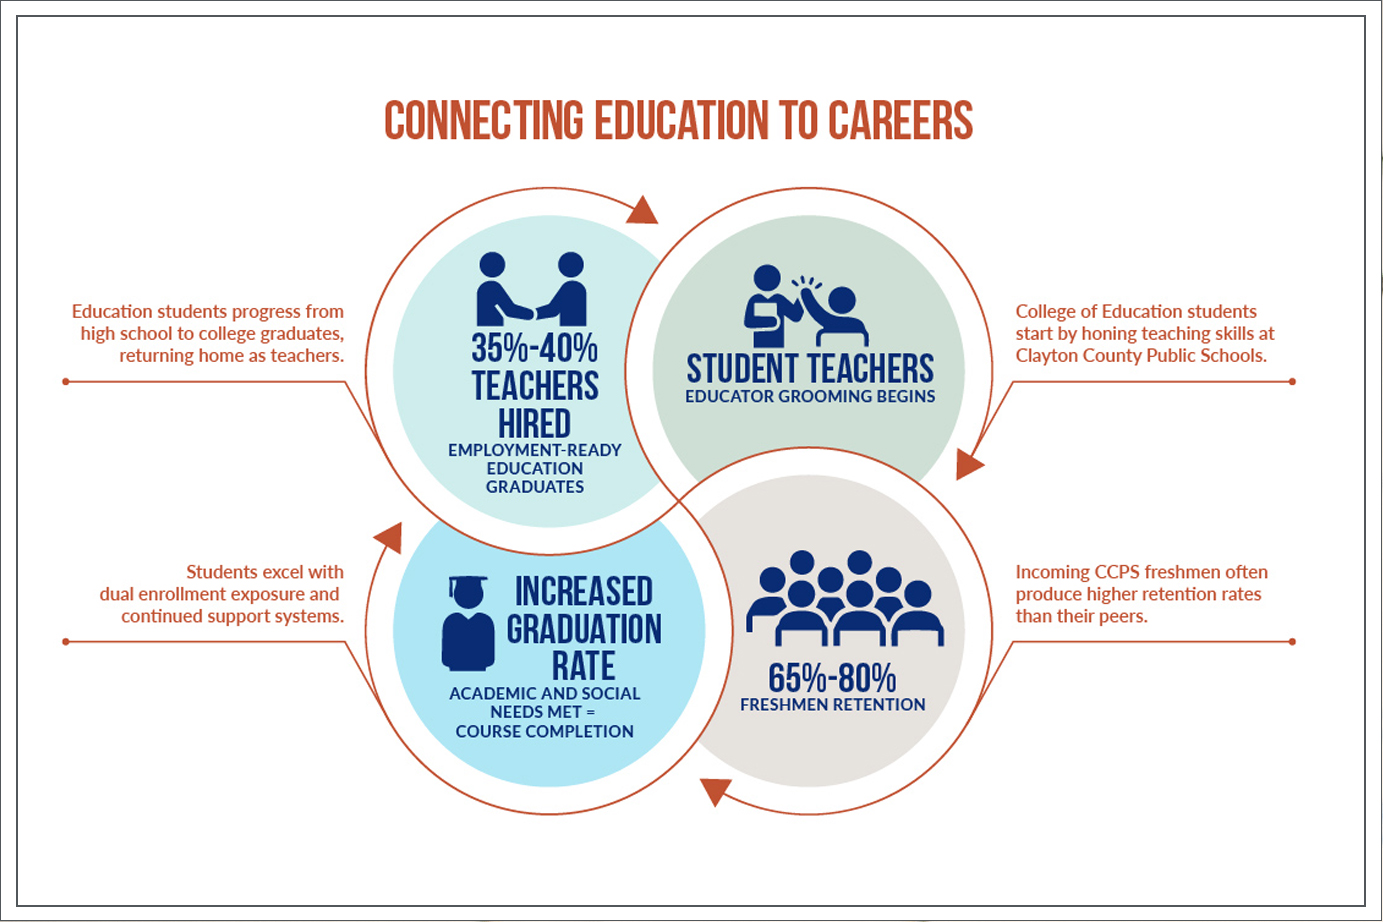 Connecting education to careers